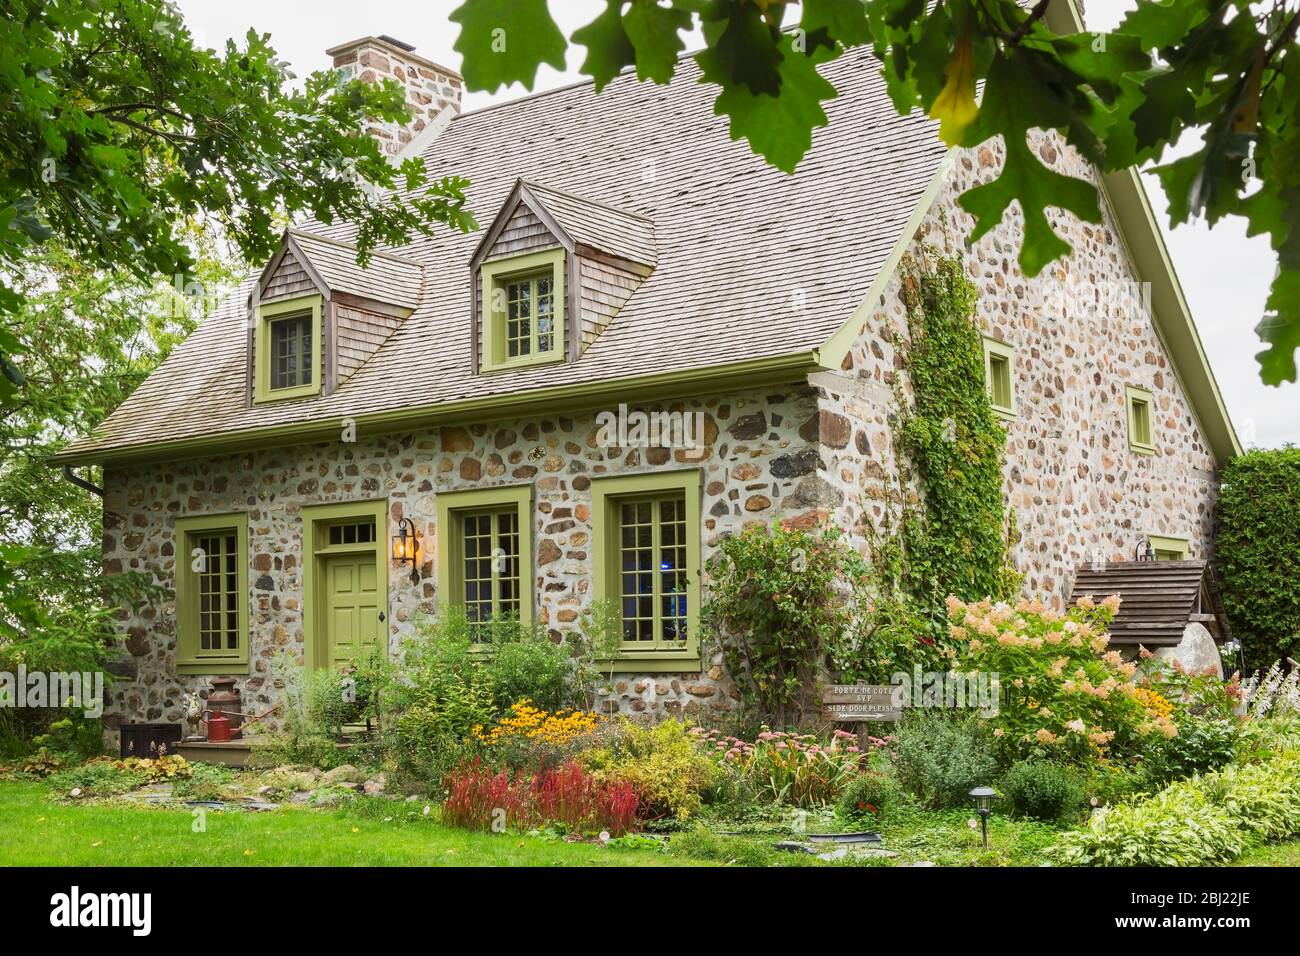 Exterior view of idyllic stone cottage with pretty garden in Canada. Stock Photo